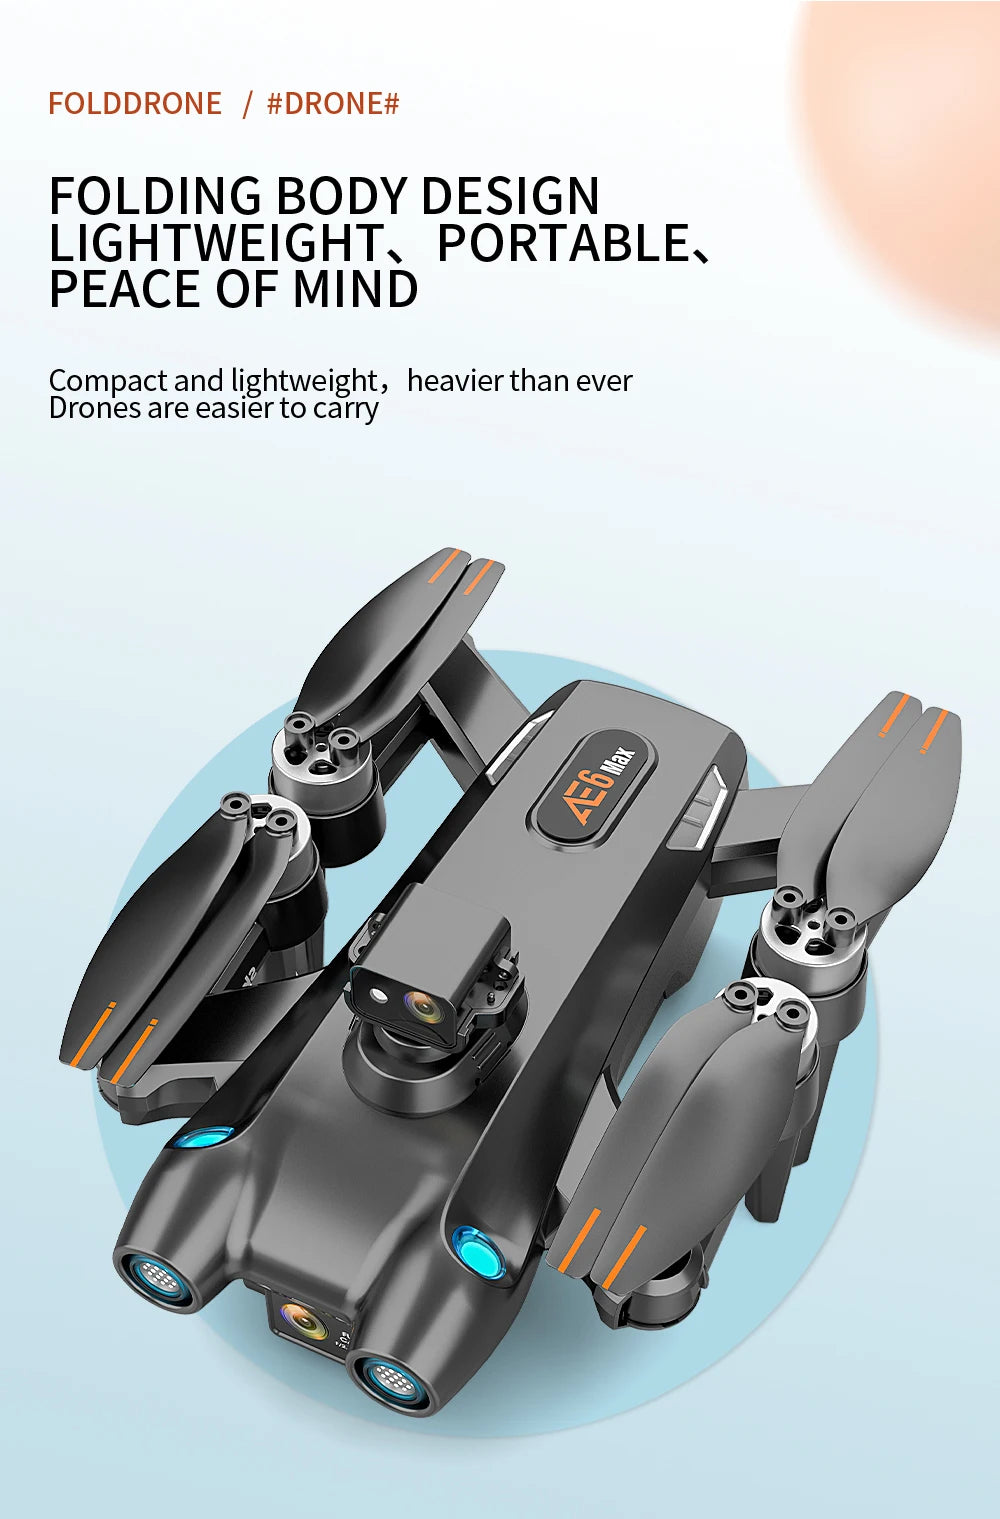 New AE6 / AE6 Max Drone, PORTABLE PEACE OF MIND Compact and lightweight, heavier than ever Drones are